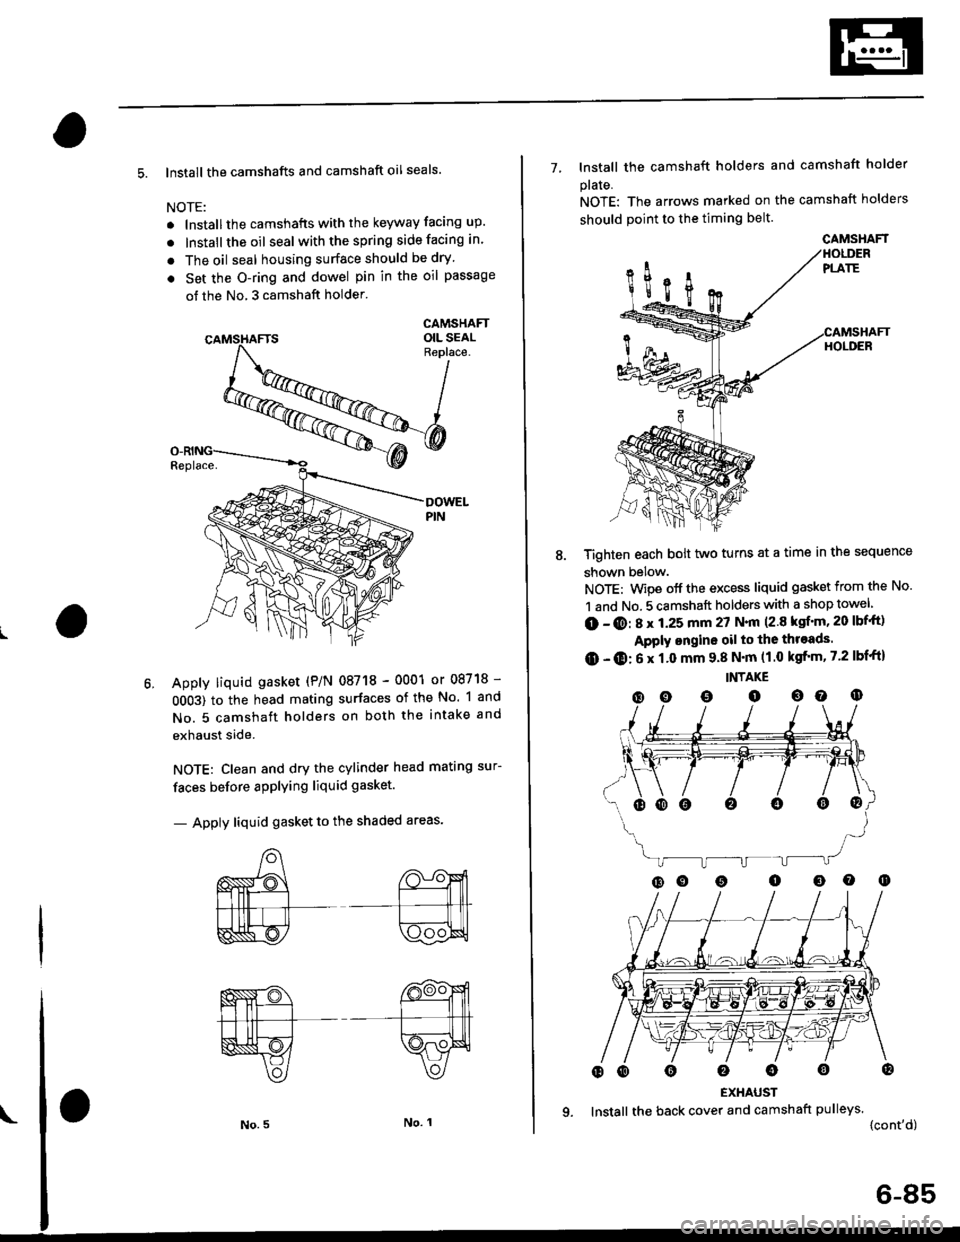 HONDA CIVIC 1999 6.G Workshop Manual 5. lnstall the camshafts and camshaft oil seals.
NOTE:
. lnstallthe camshafts with the keyway facing up.
. lnstall the oil seal withthespring side facing in.
. The oil seal housing surface should be d